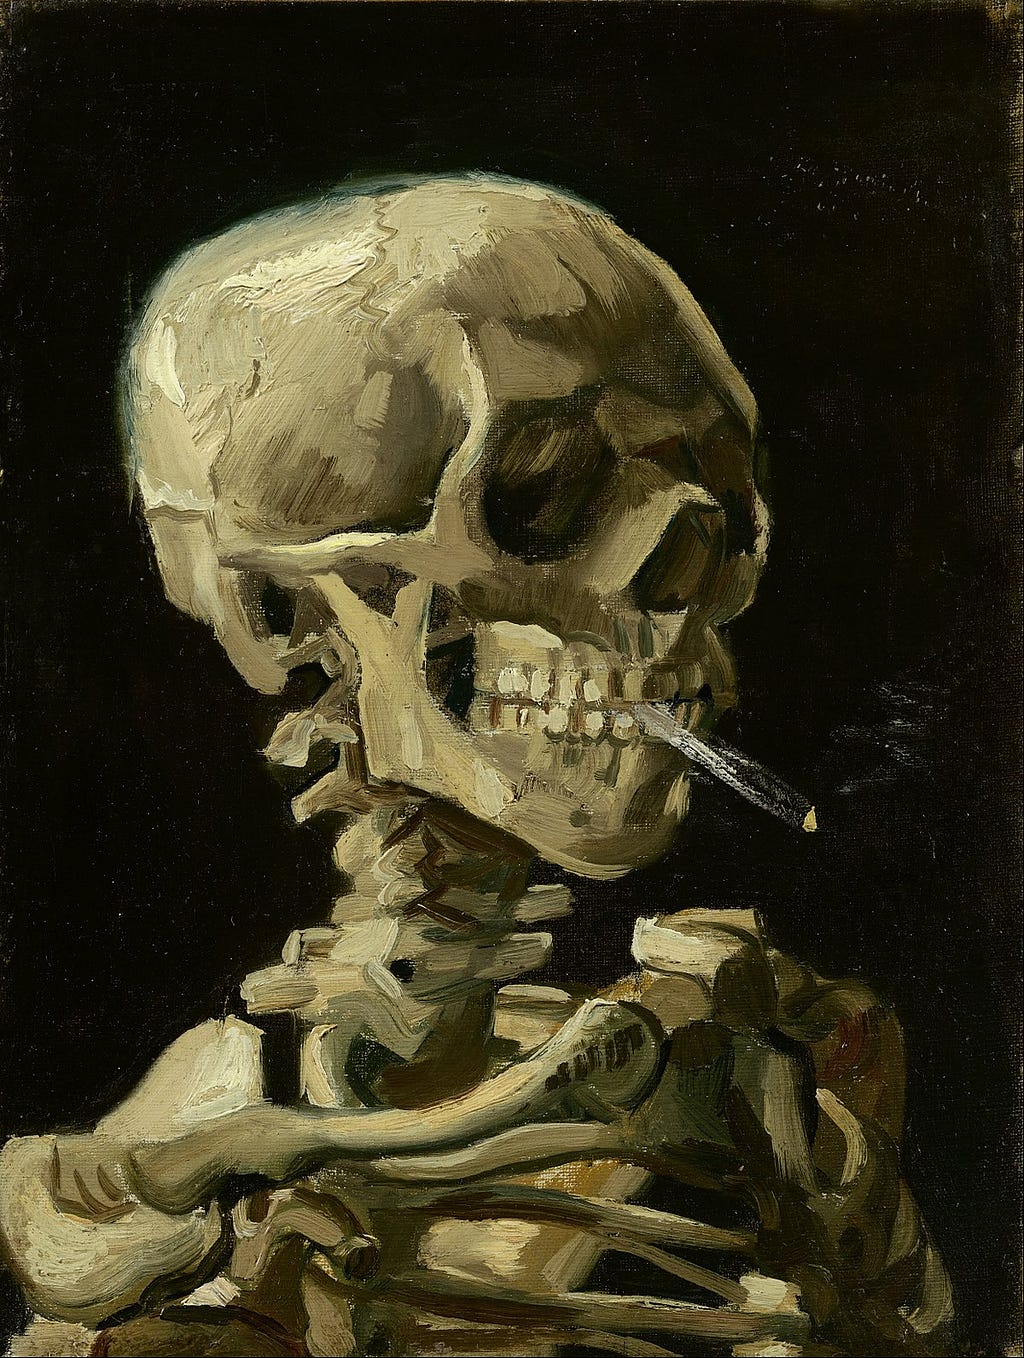 a painting of a skeleton with a black background clenching a rolled cigarette in their teeth. the original artist is Van Gogh